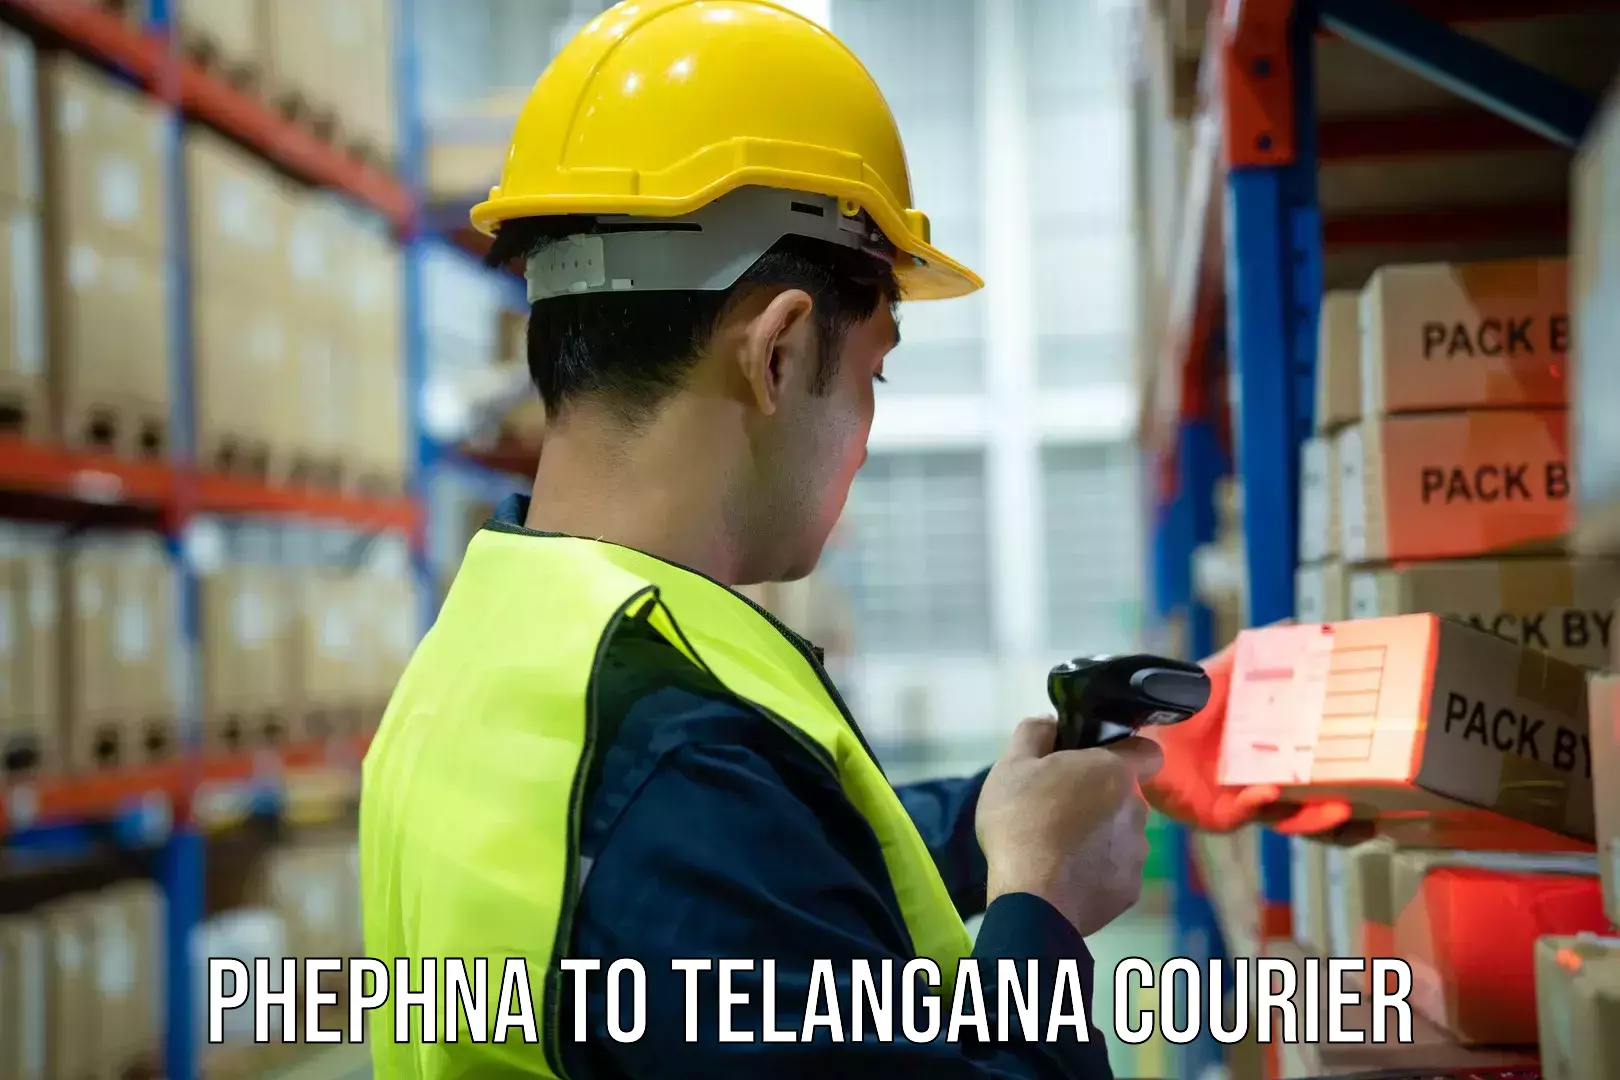 Easy access courier services in Phephna to Chintoor